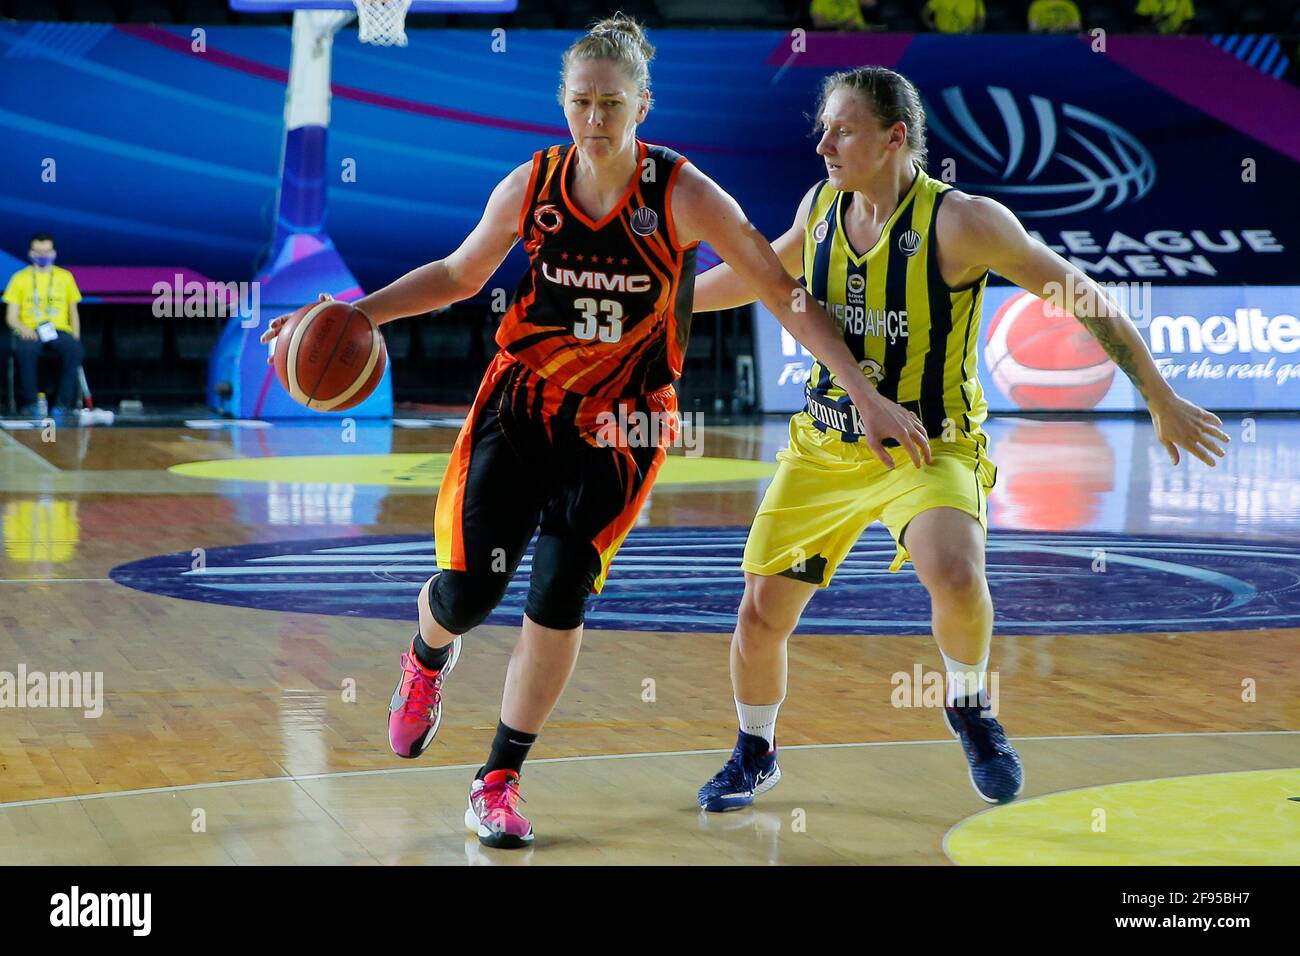 ISTANBUL, Turkey. 16th Apr, 2021: Basketbal: Fenerbahce Oznur Kablo v UMMC Ekaterinburg: Istanboel ISTANBUL, Turkey. 16th Apr, 2021. APRIL 16: Emma Meesseman of UMMC Ekaterinburg, Alina Iagupova of Fenerbahce Oznur Kablo during the Euroleague Women Final Four match between Fenerbahce Oznur Kablo and UMMC Ekaterinburg at Volkswagen Arena on April 16, 2021 in Istanbul, Turkey (Photo by /Orange Pictures) Credit: Orange Pics BV/Alamy Live News Stock Photo